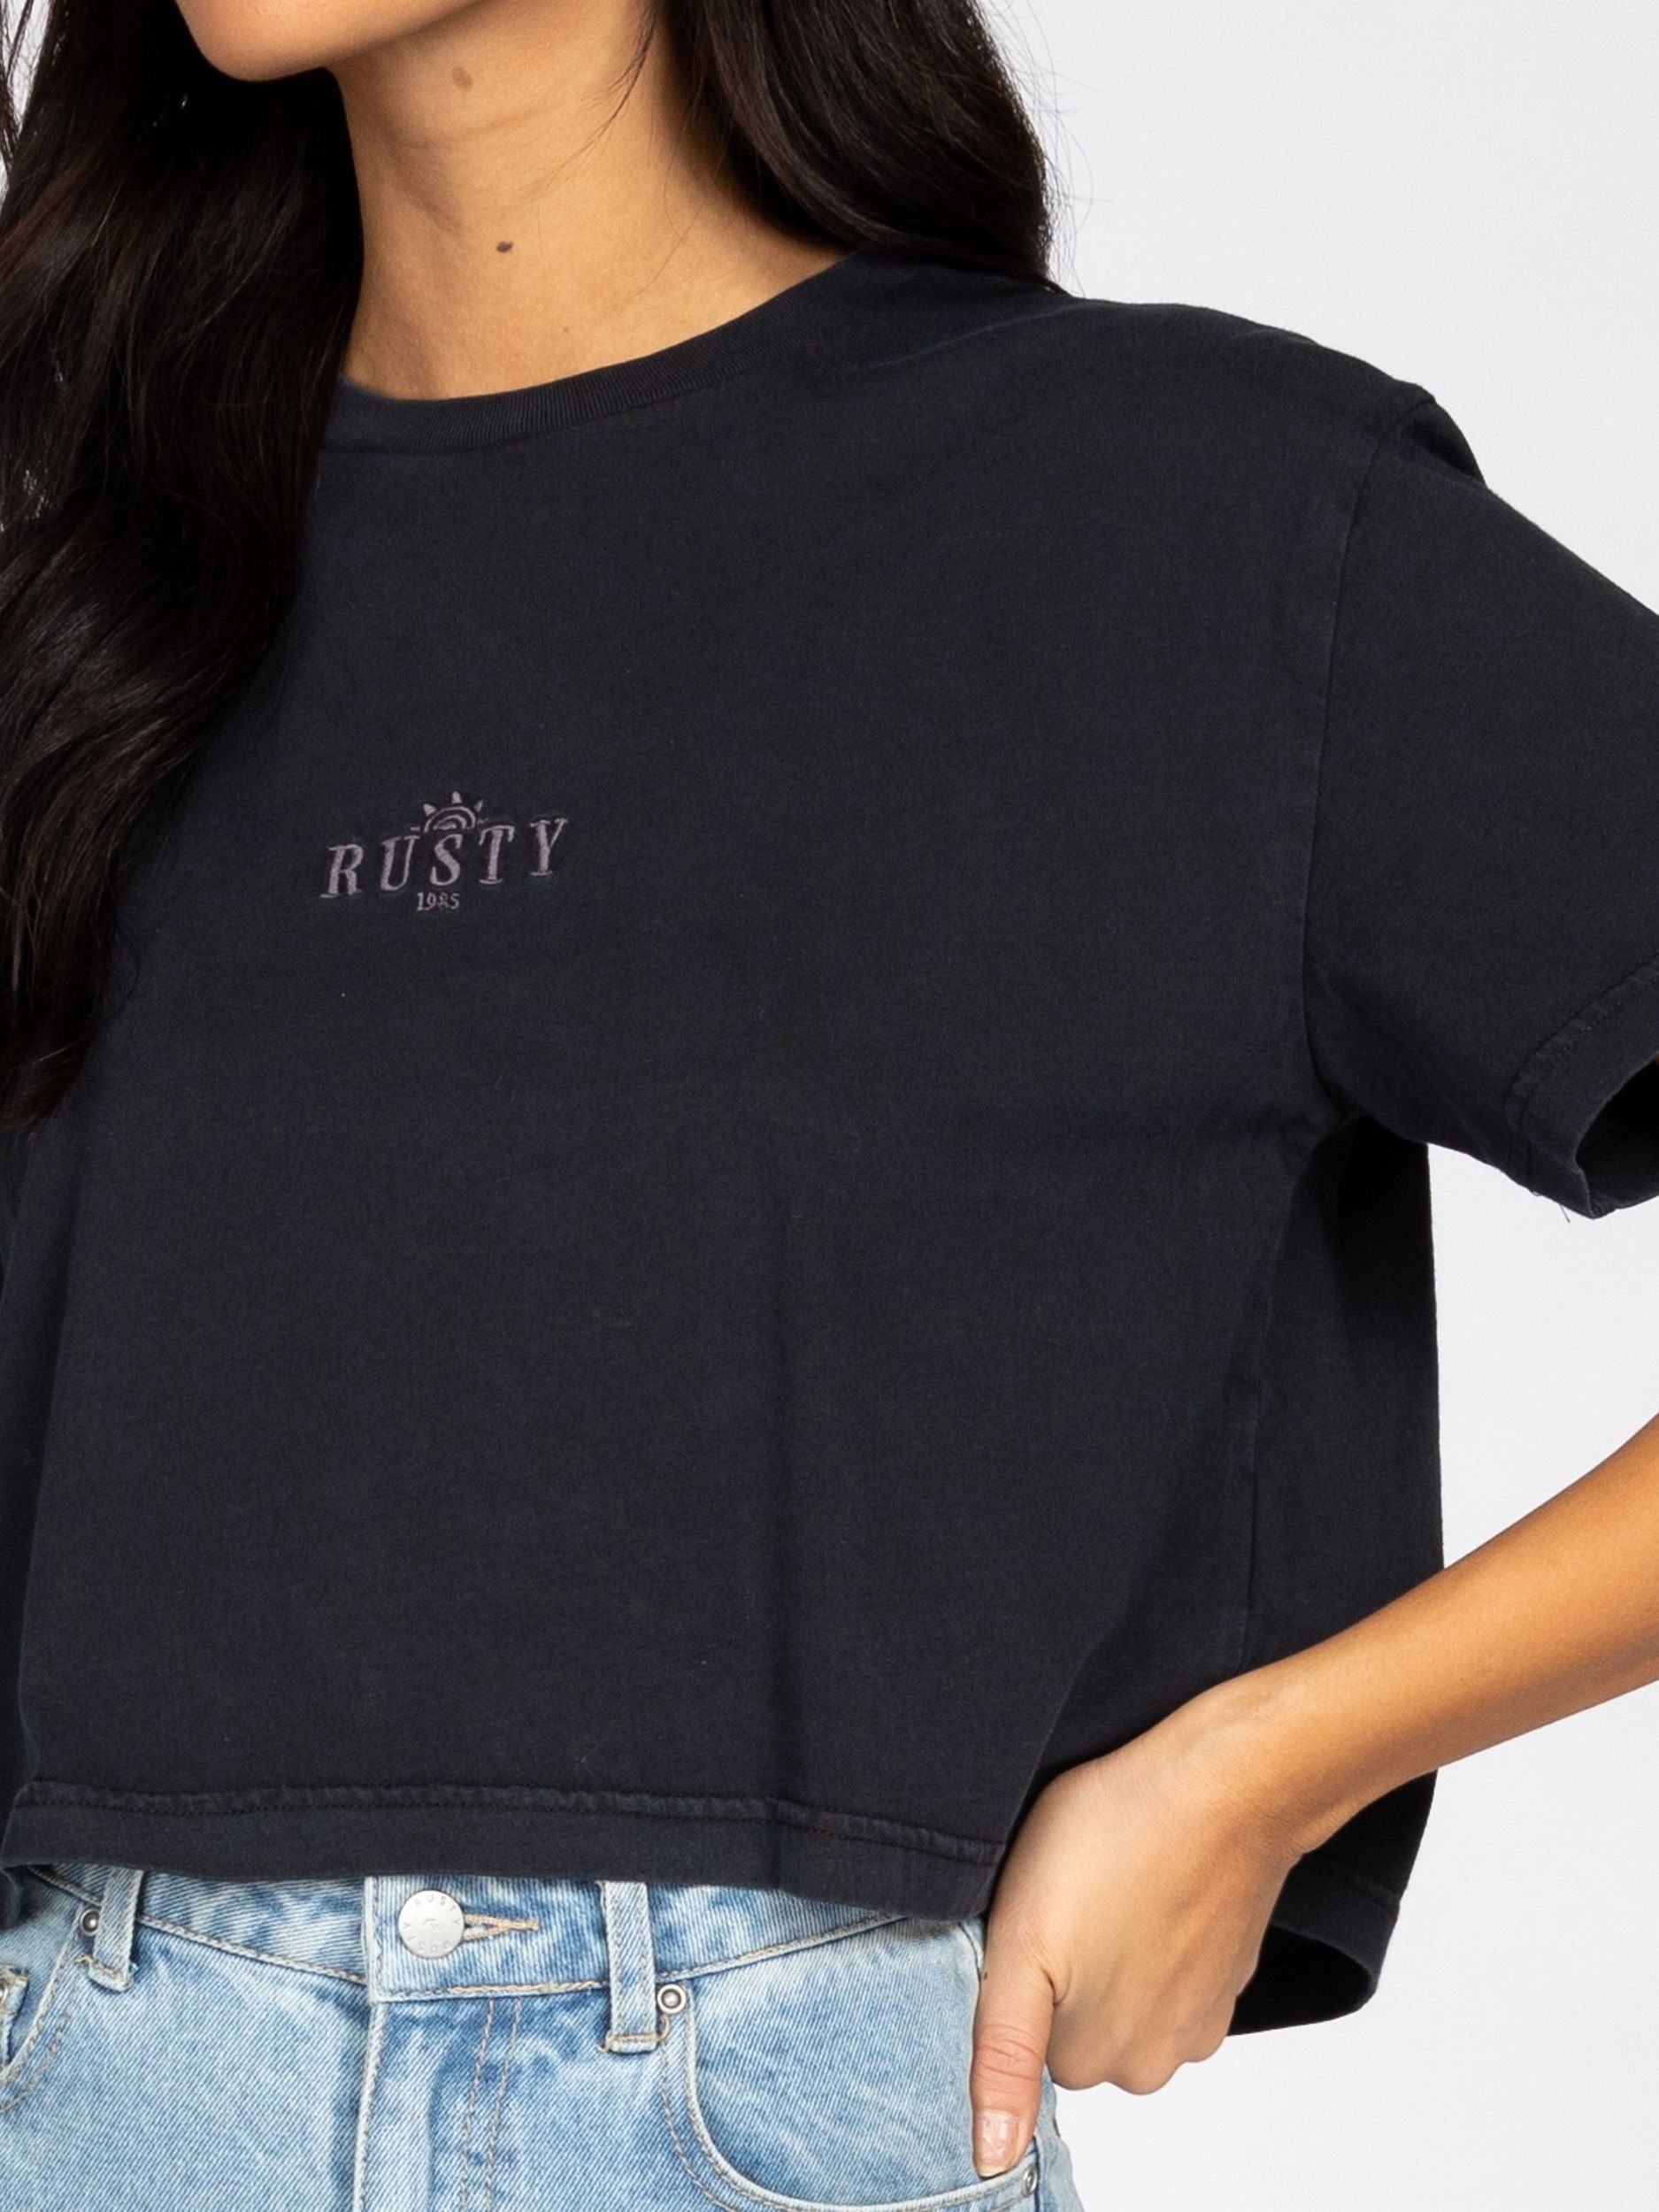 Rusty T-Shirt RUSTY SUNRISE RELAXED Washed TEE Black CROP FIT